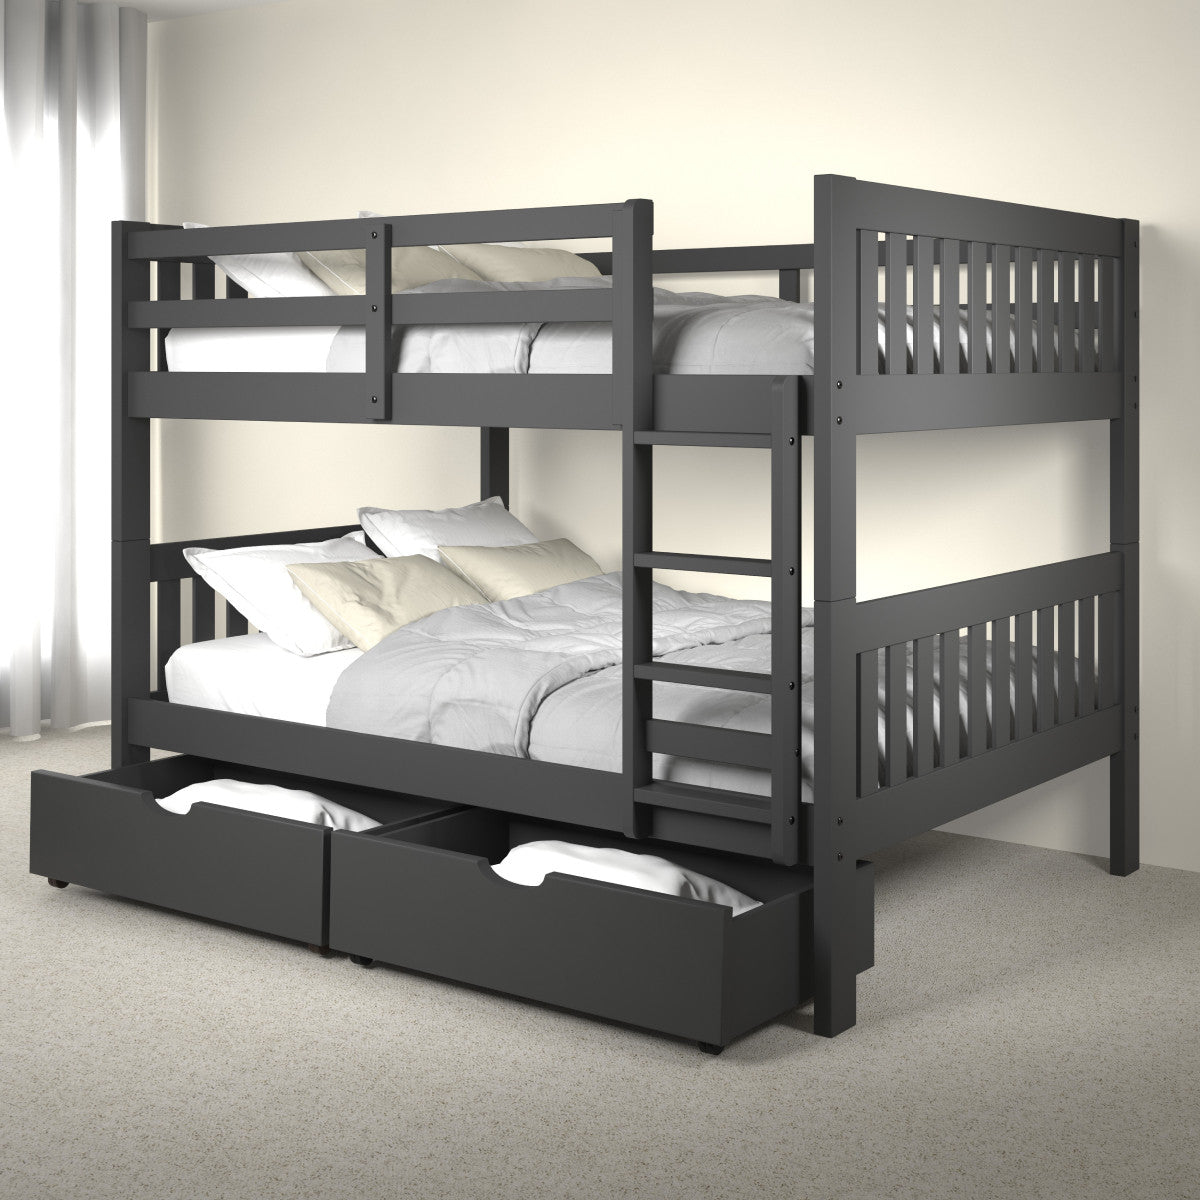 FULL/FULL MISSION BUNK BED WITH DUAL UNDERBED DRAWERS DARK GREY FINISH